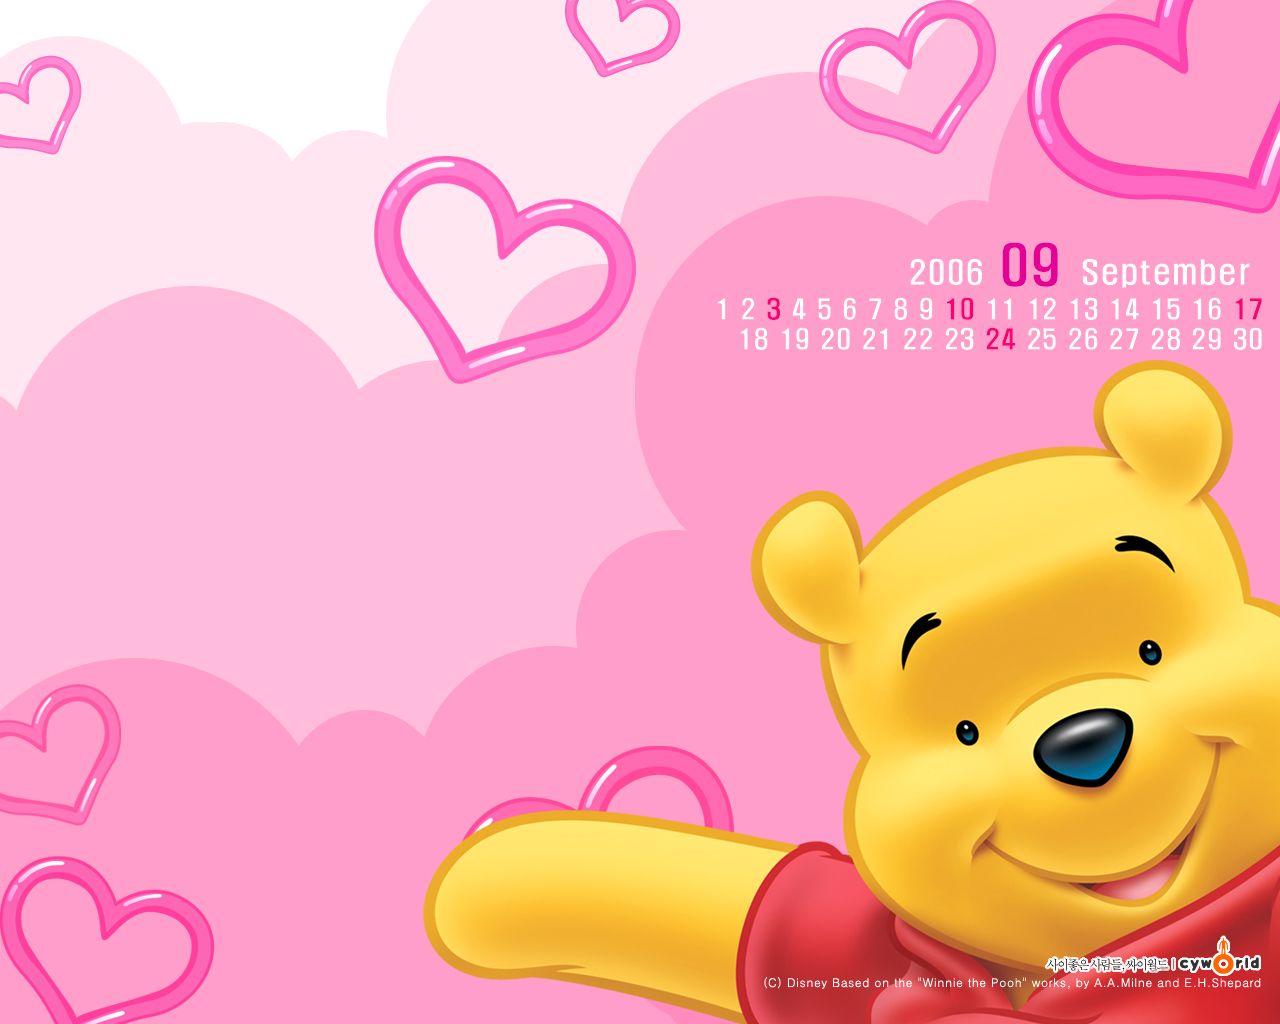 Winnie the pooh wallpapers